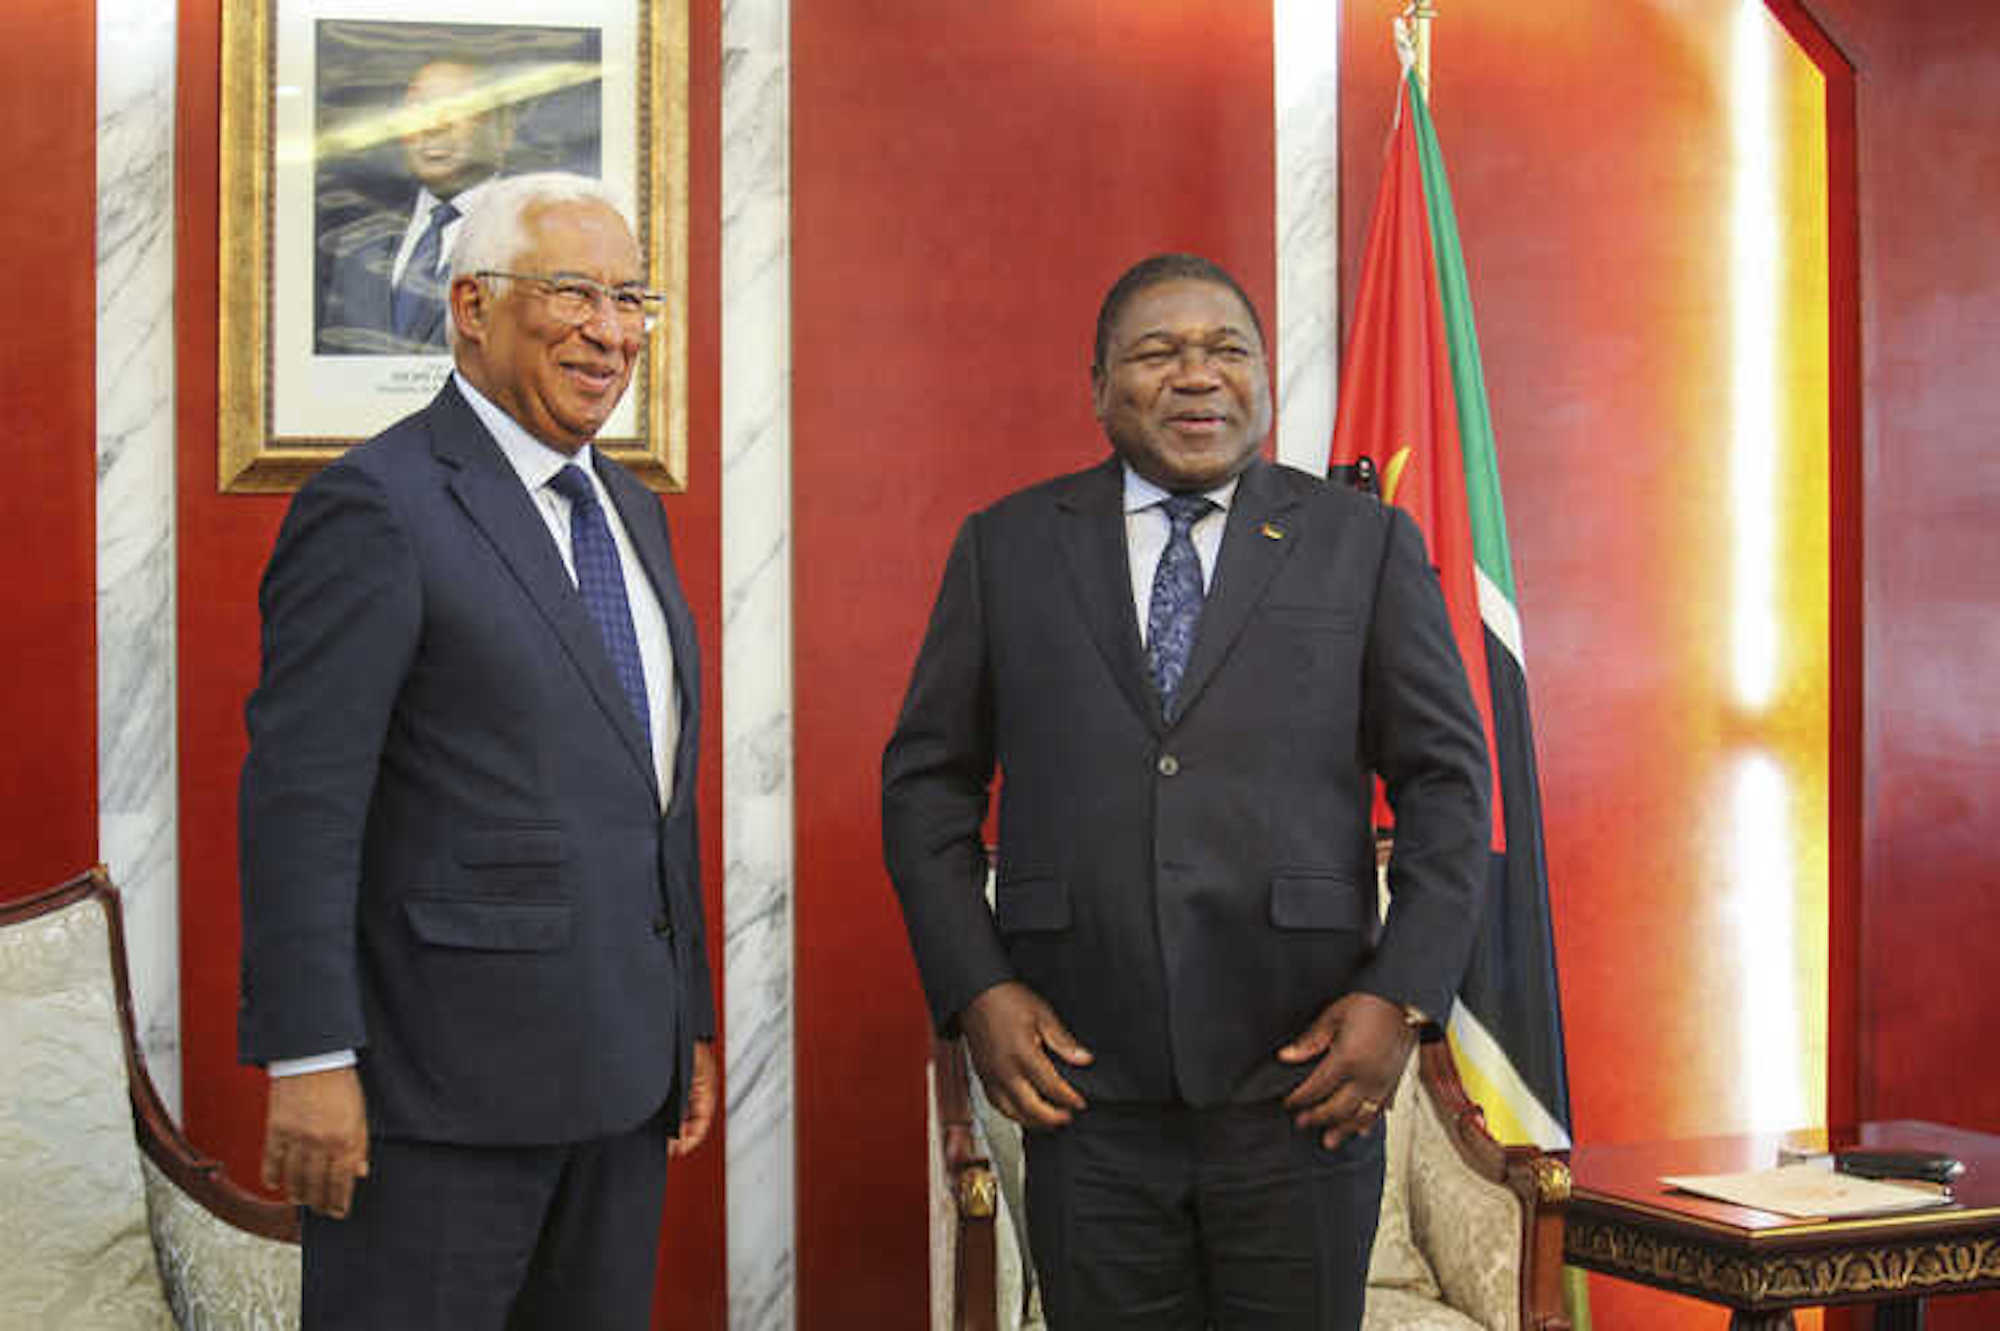 Portugal ratifies mobility agreement on visas within CPLP